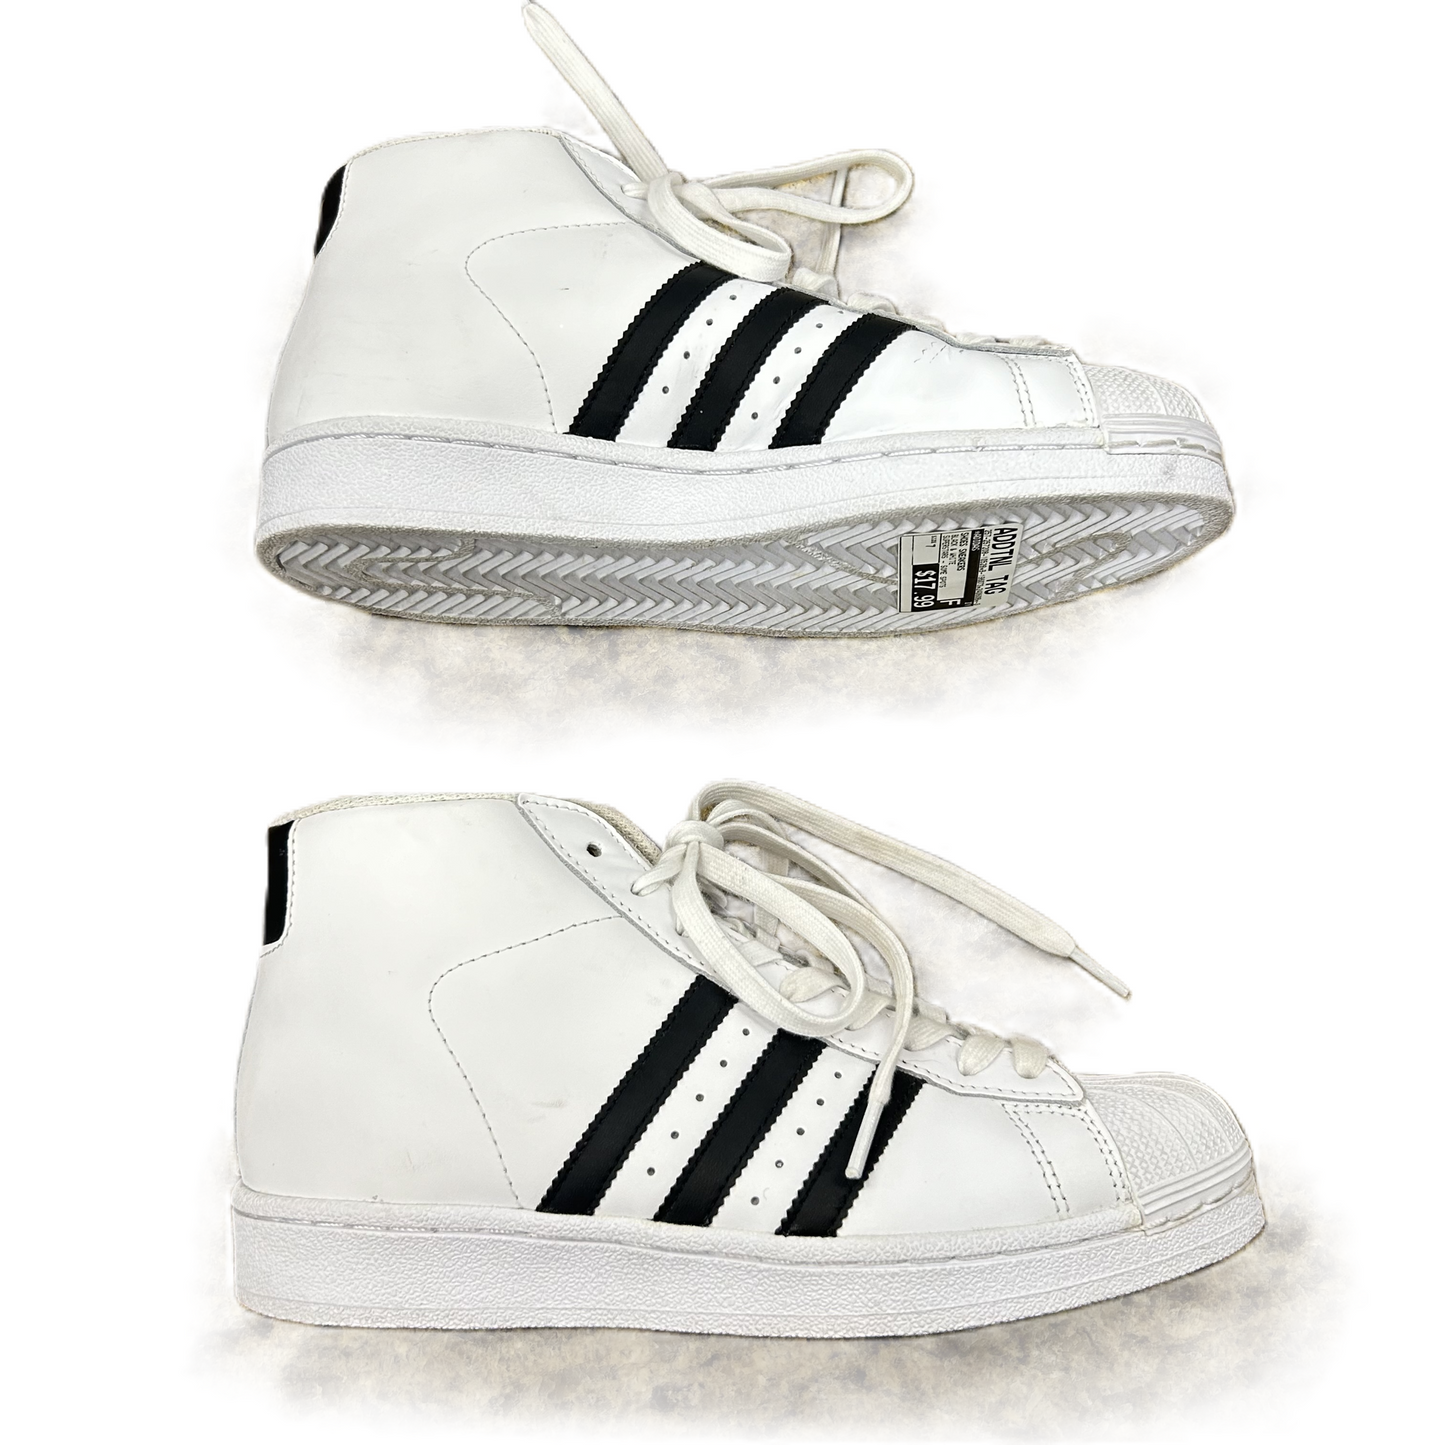 Black & White Shoes Sneakers By Adidas, Size: 7